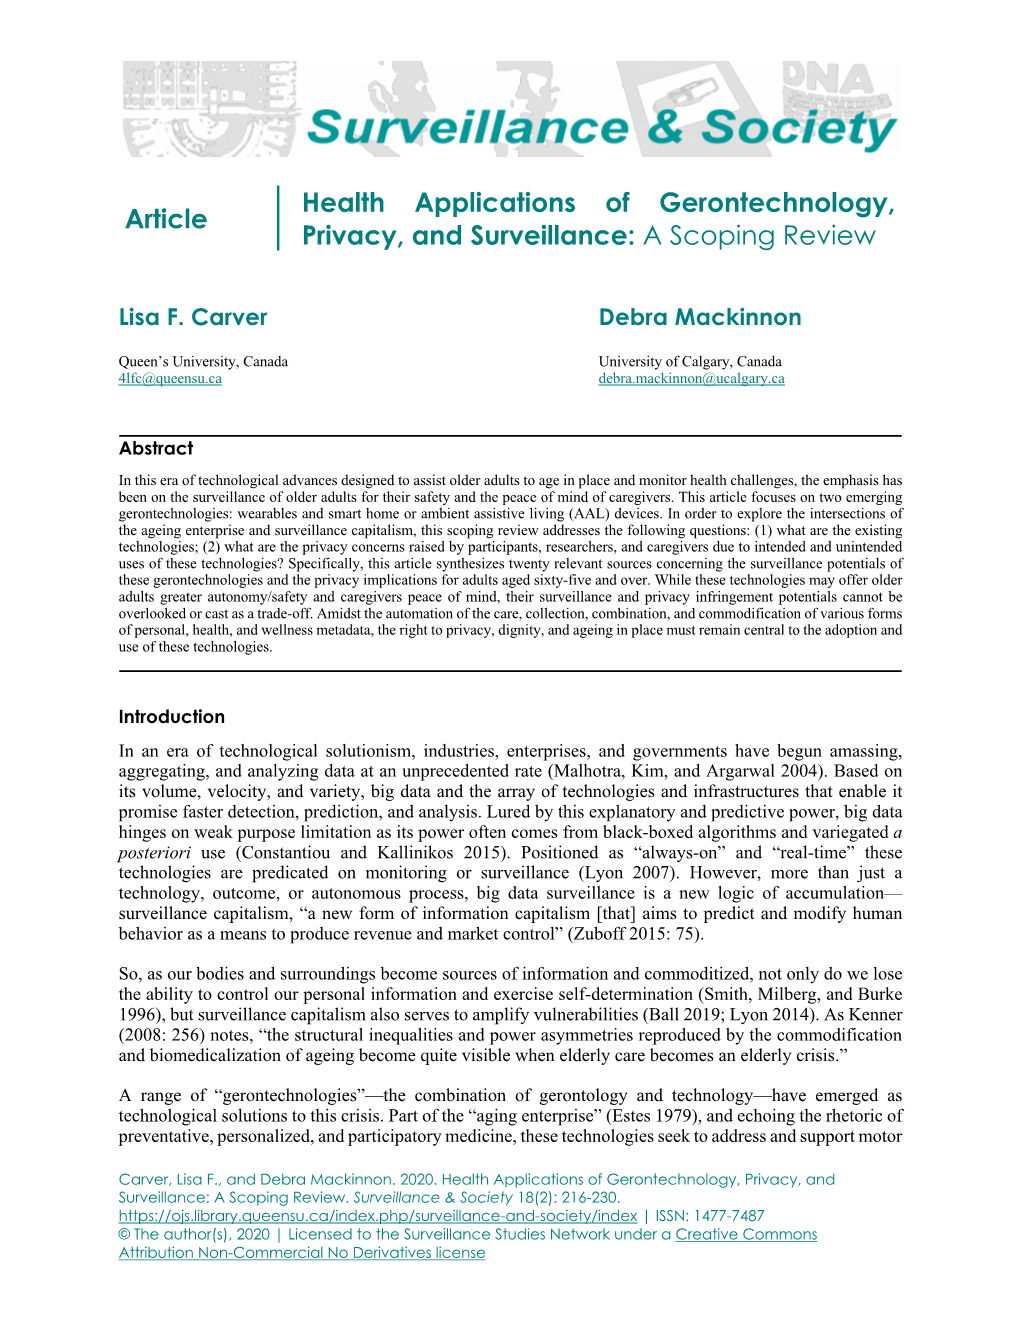 Article Health Applications of Gerontechnology, Privacy, And